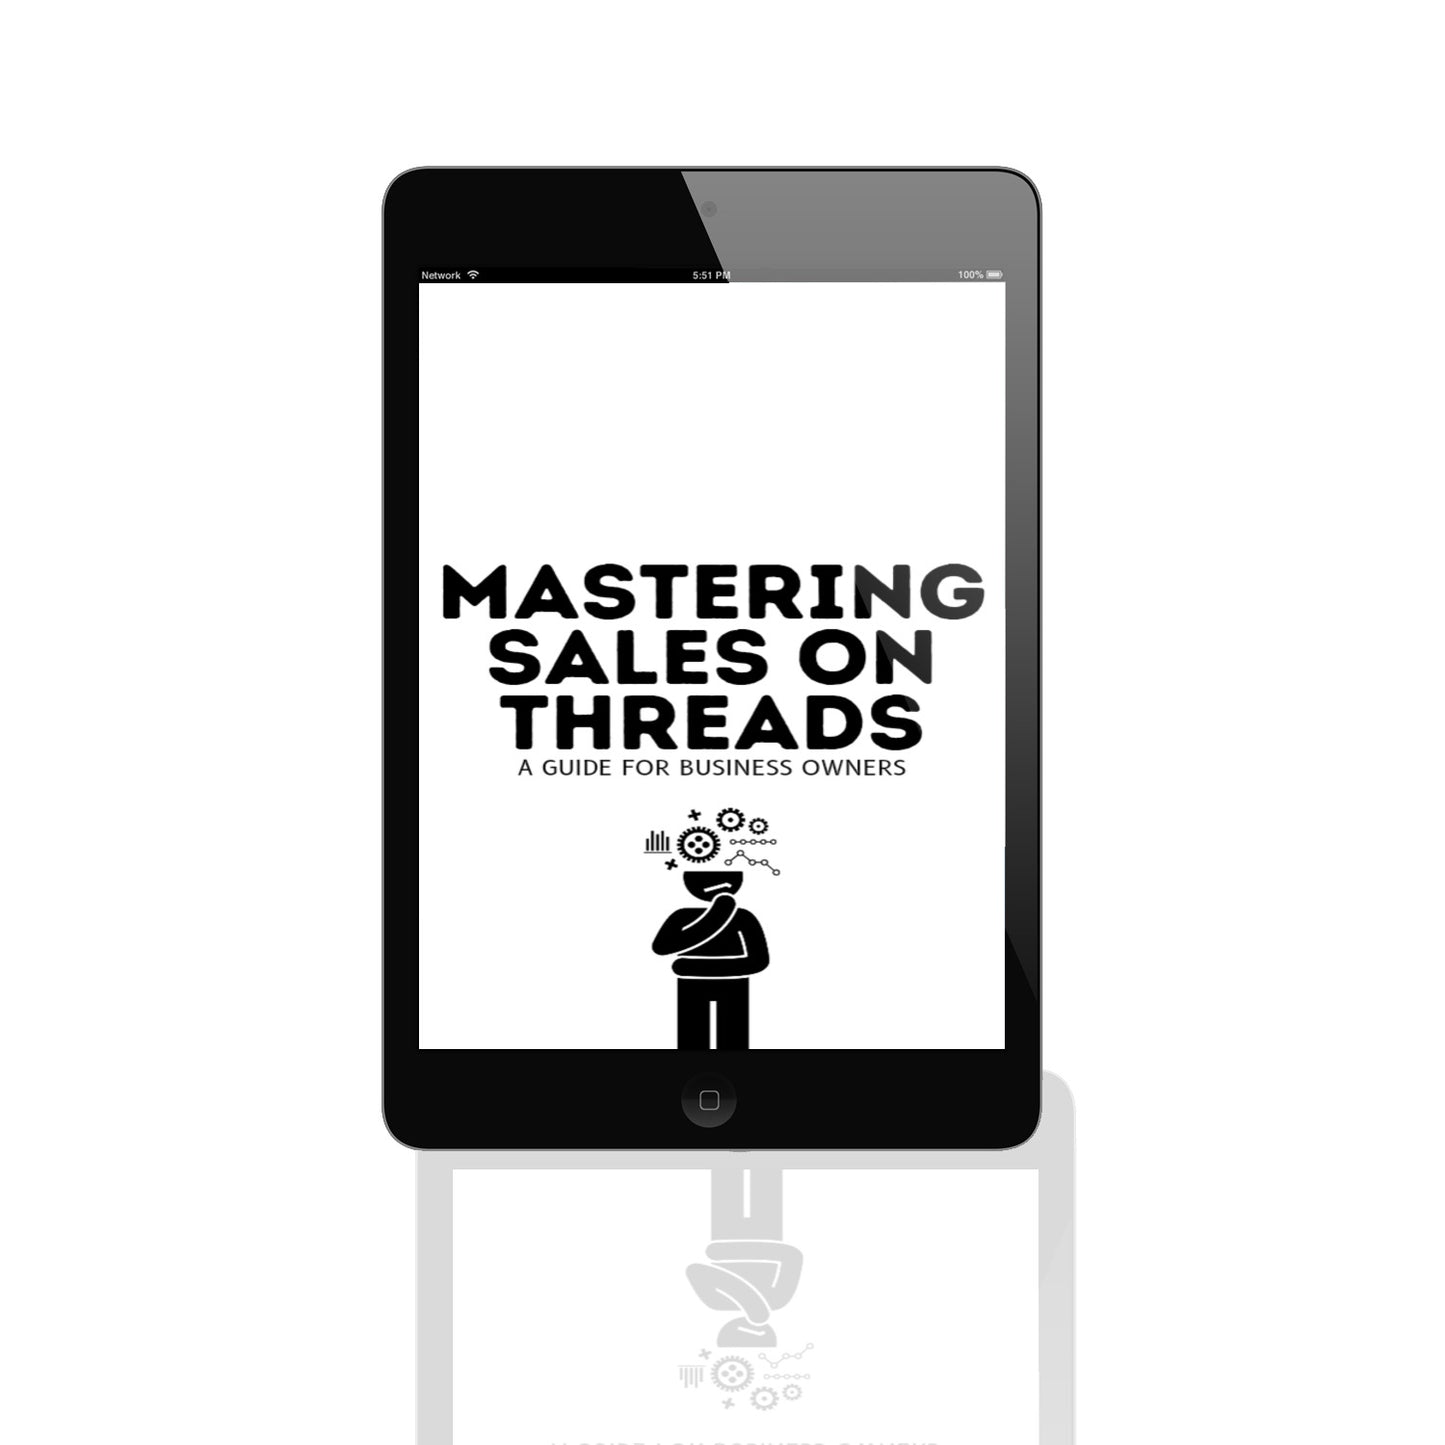 Mastering Sales on Threads: A Guide for Business Owners